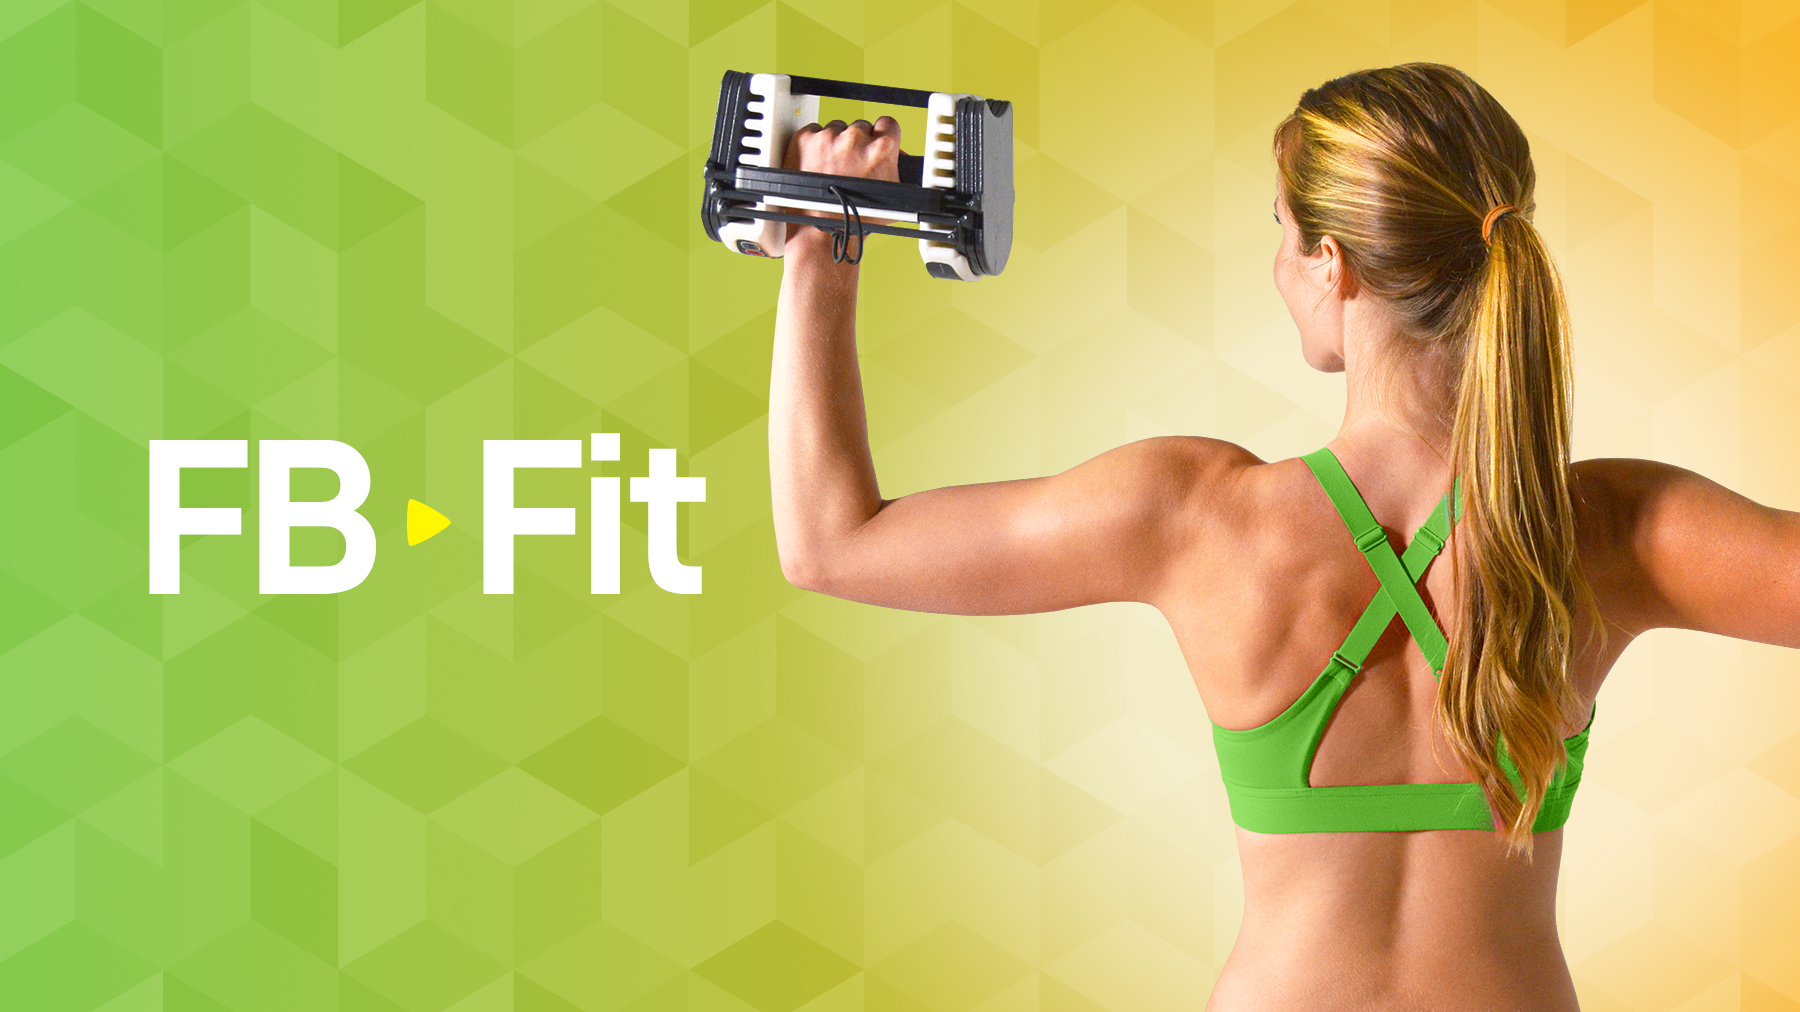 Fit - 8 Week Fat Loss Program to Lose Weight, Lean Tone Up | Fitness Blender